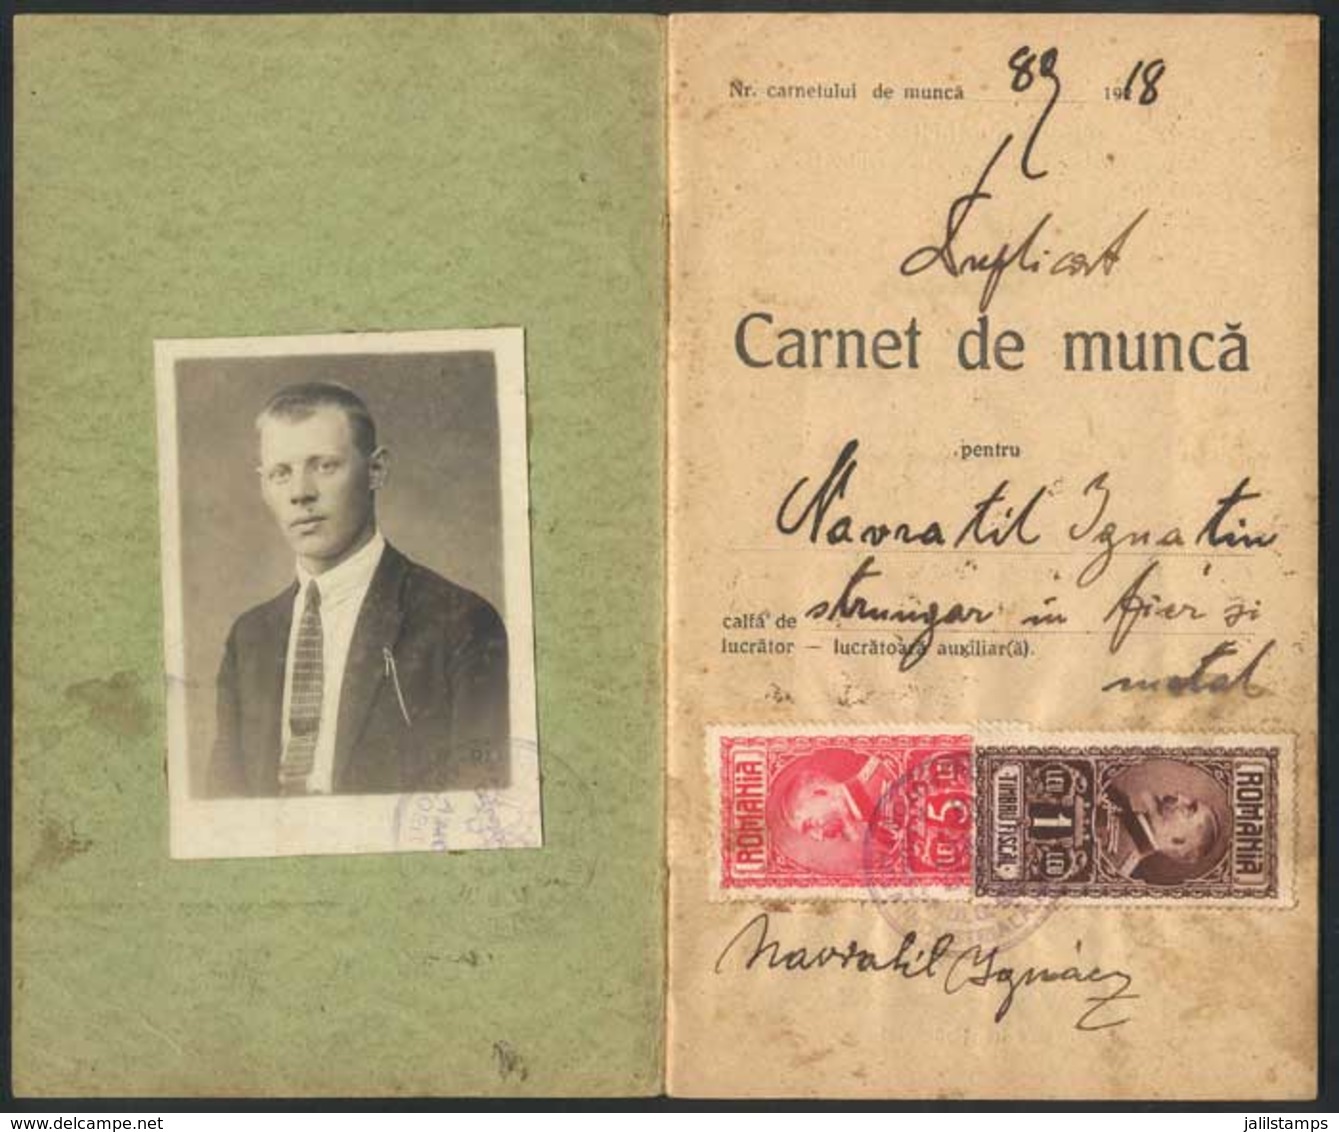 1452 ROMANIA: WORK BOOK (Carnet De Munca) Of The Year 1918 Of A Man That Emigrated To Arge - Non Classés